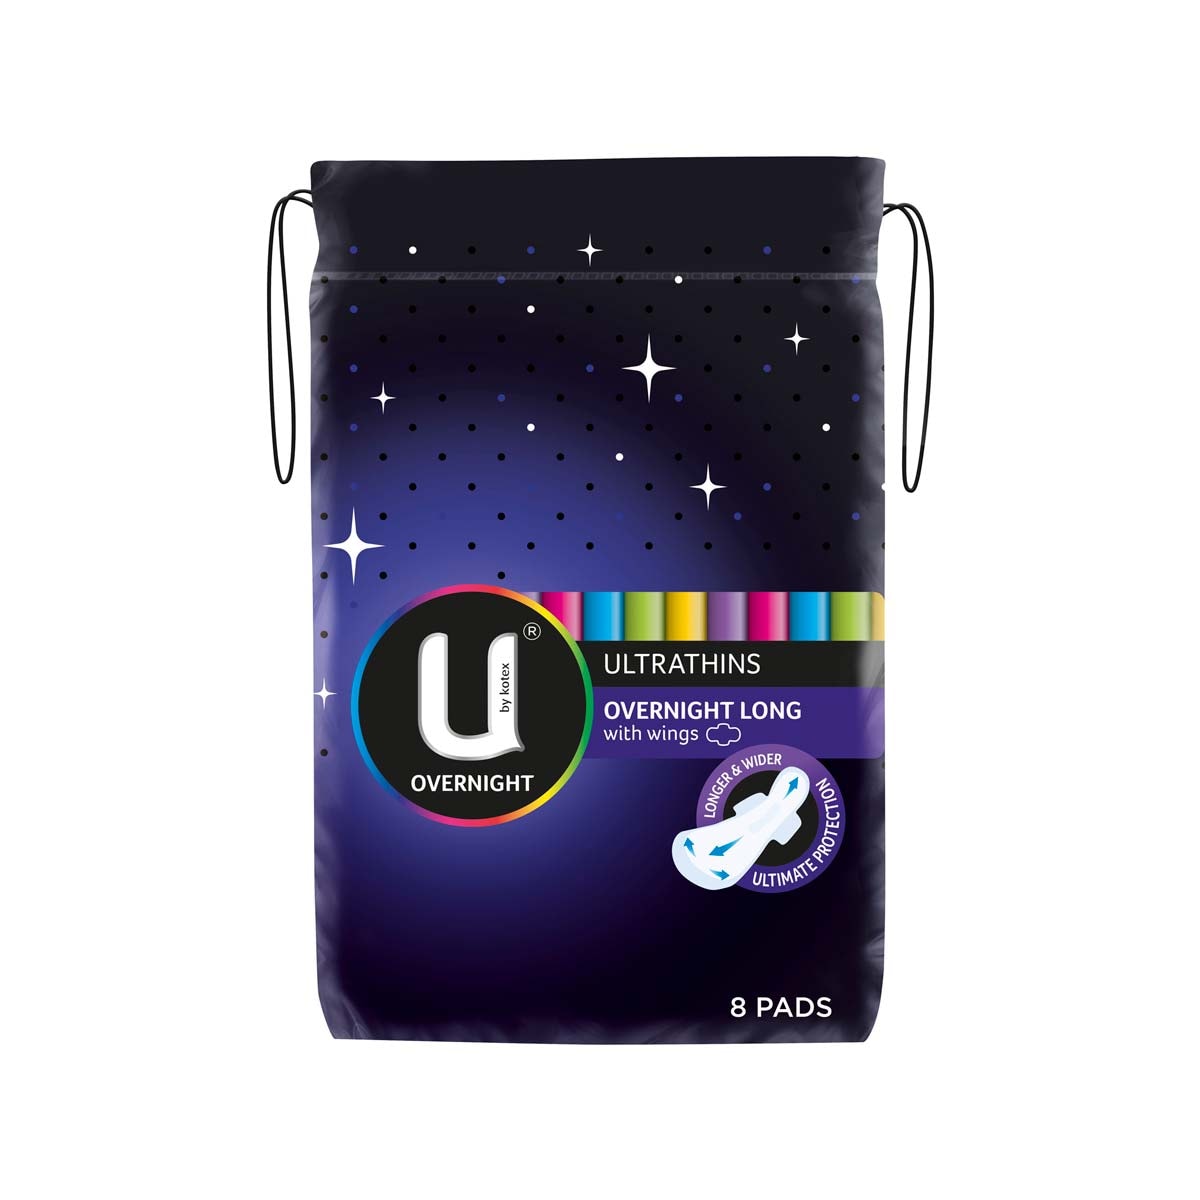 U by Kotex UltraThins Overnight Long Wing Pads 8 Pack